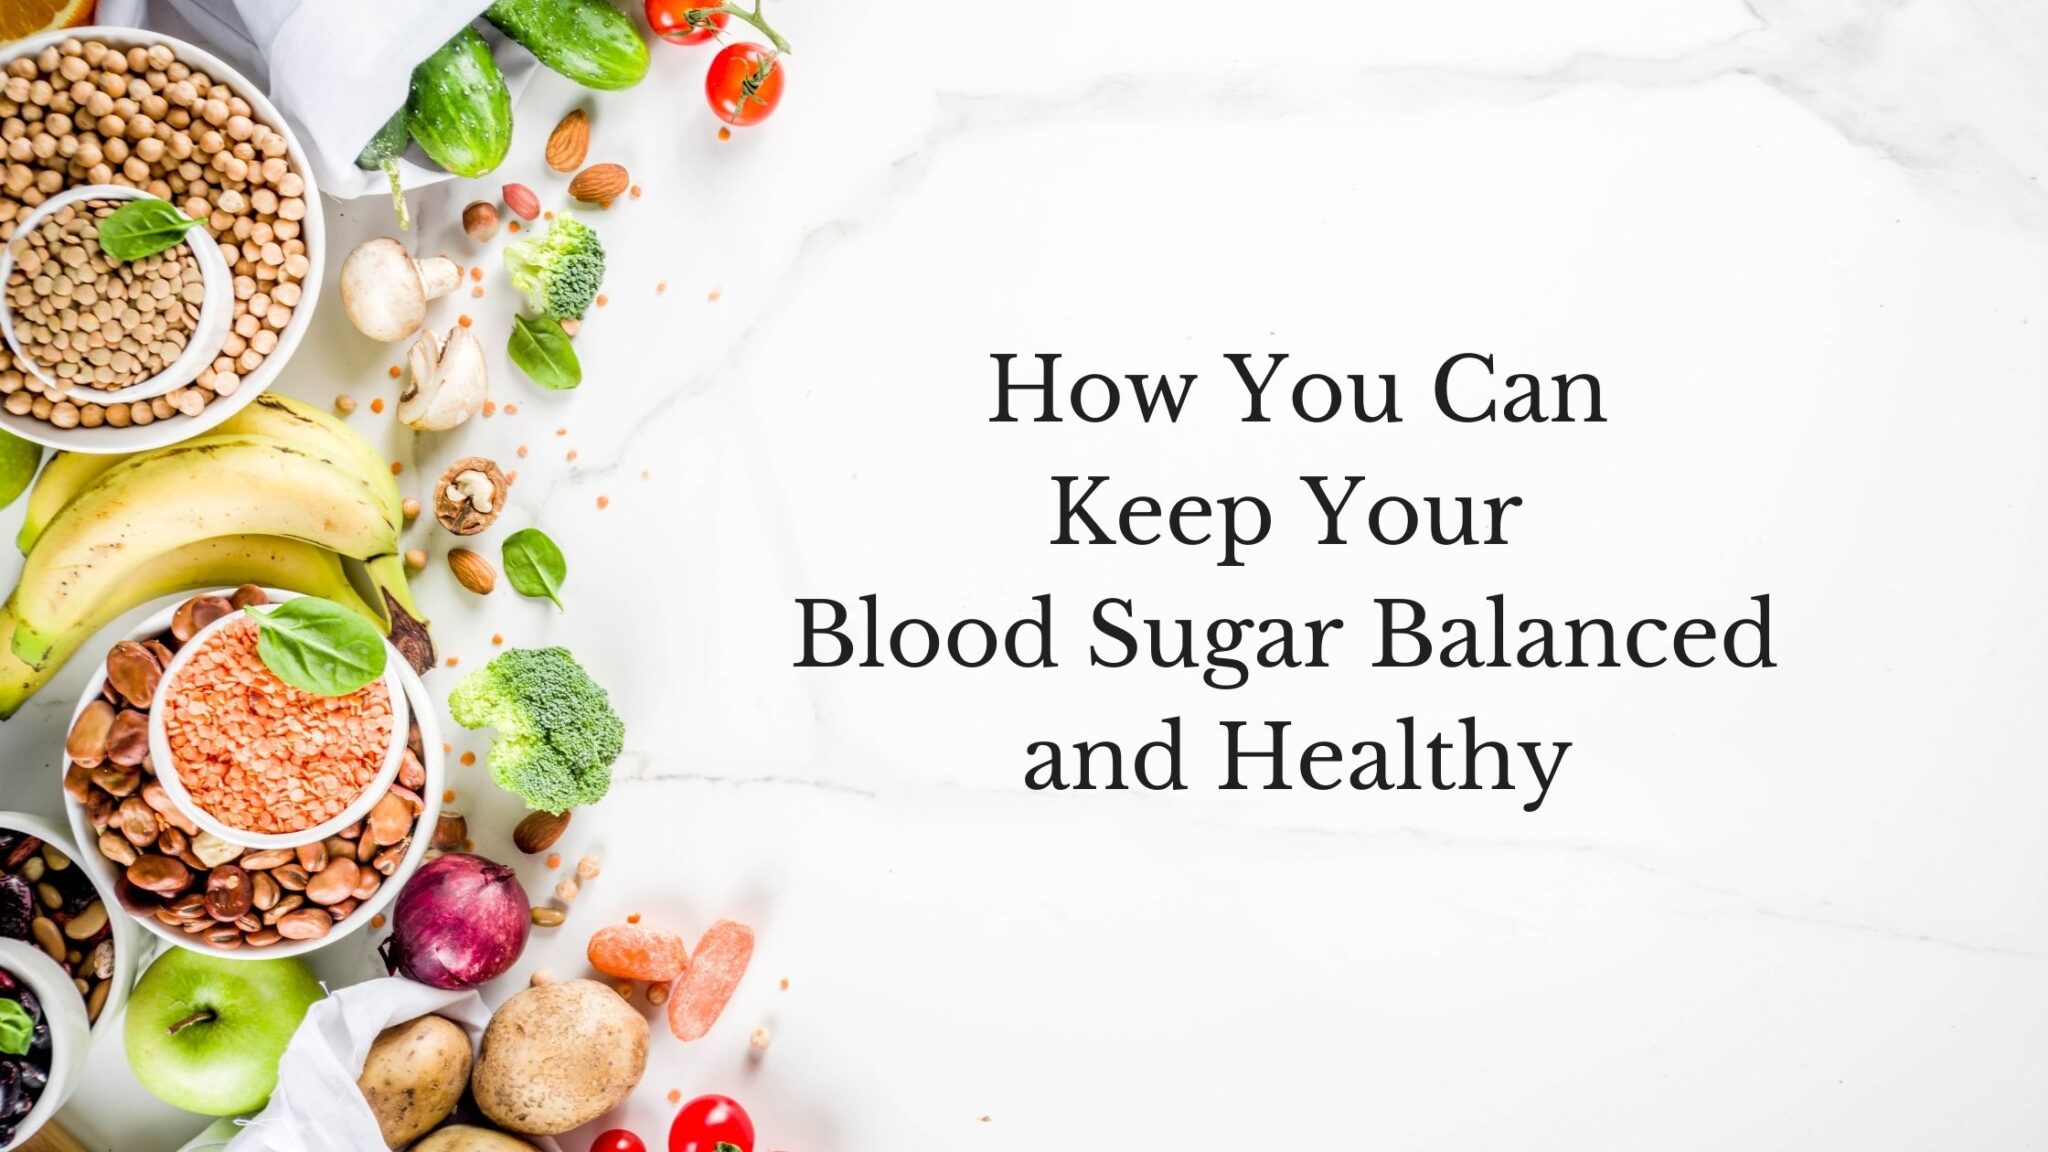 How to keep your blood sugar balanced and healthy